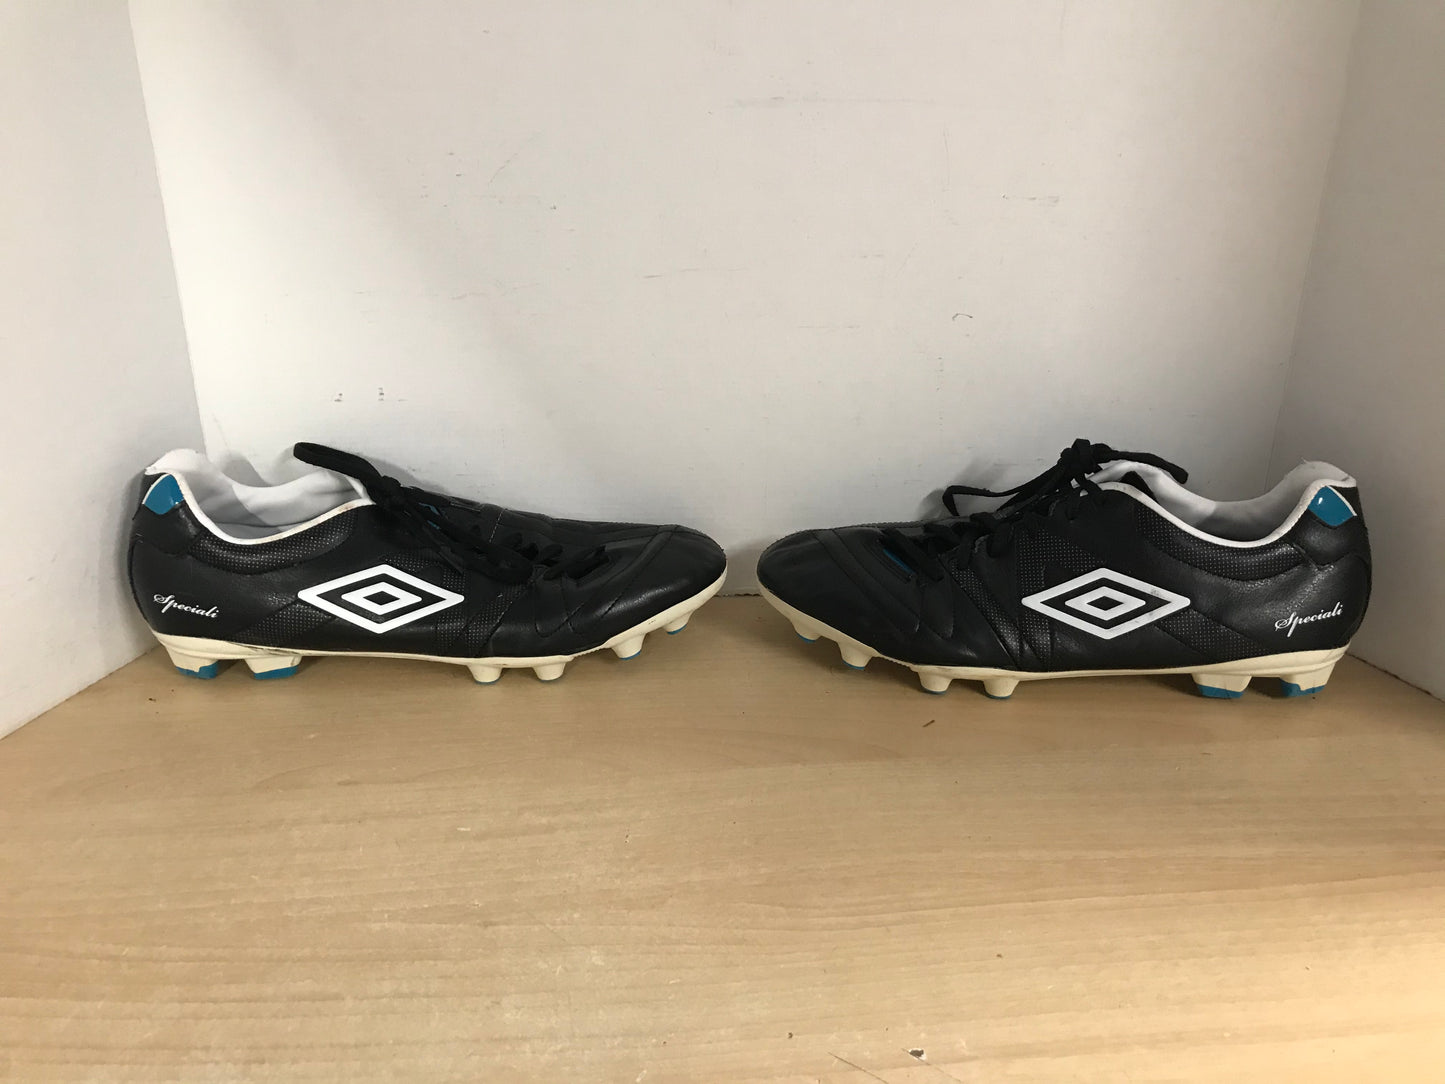 Soccer Shoes Cleats Men's Size 13 Umbro Special Black White Blue Leather As New